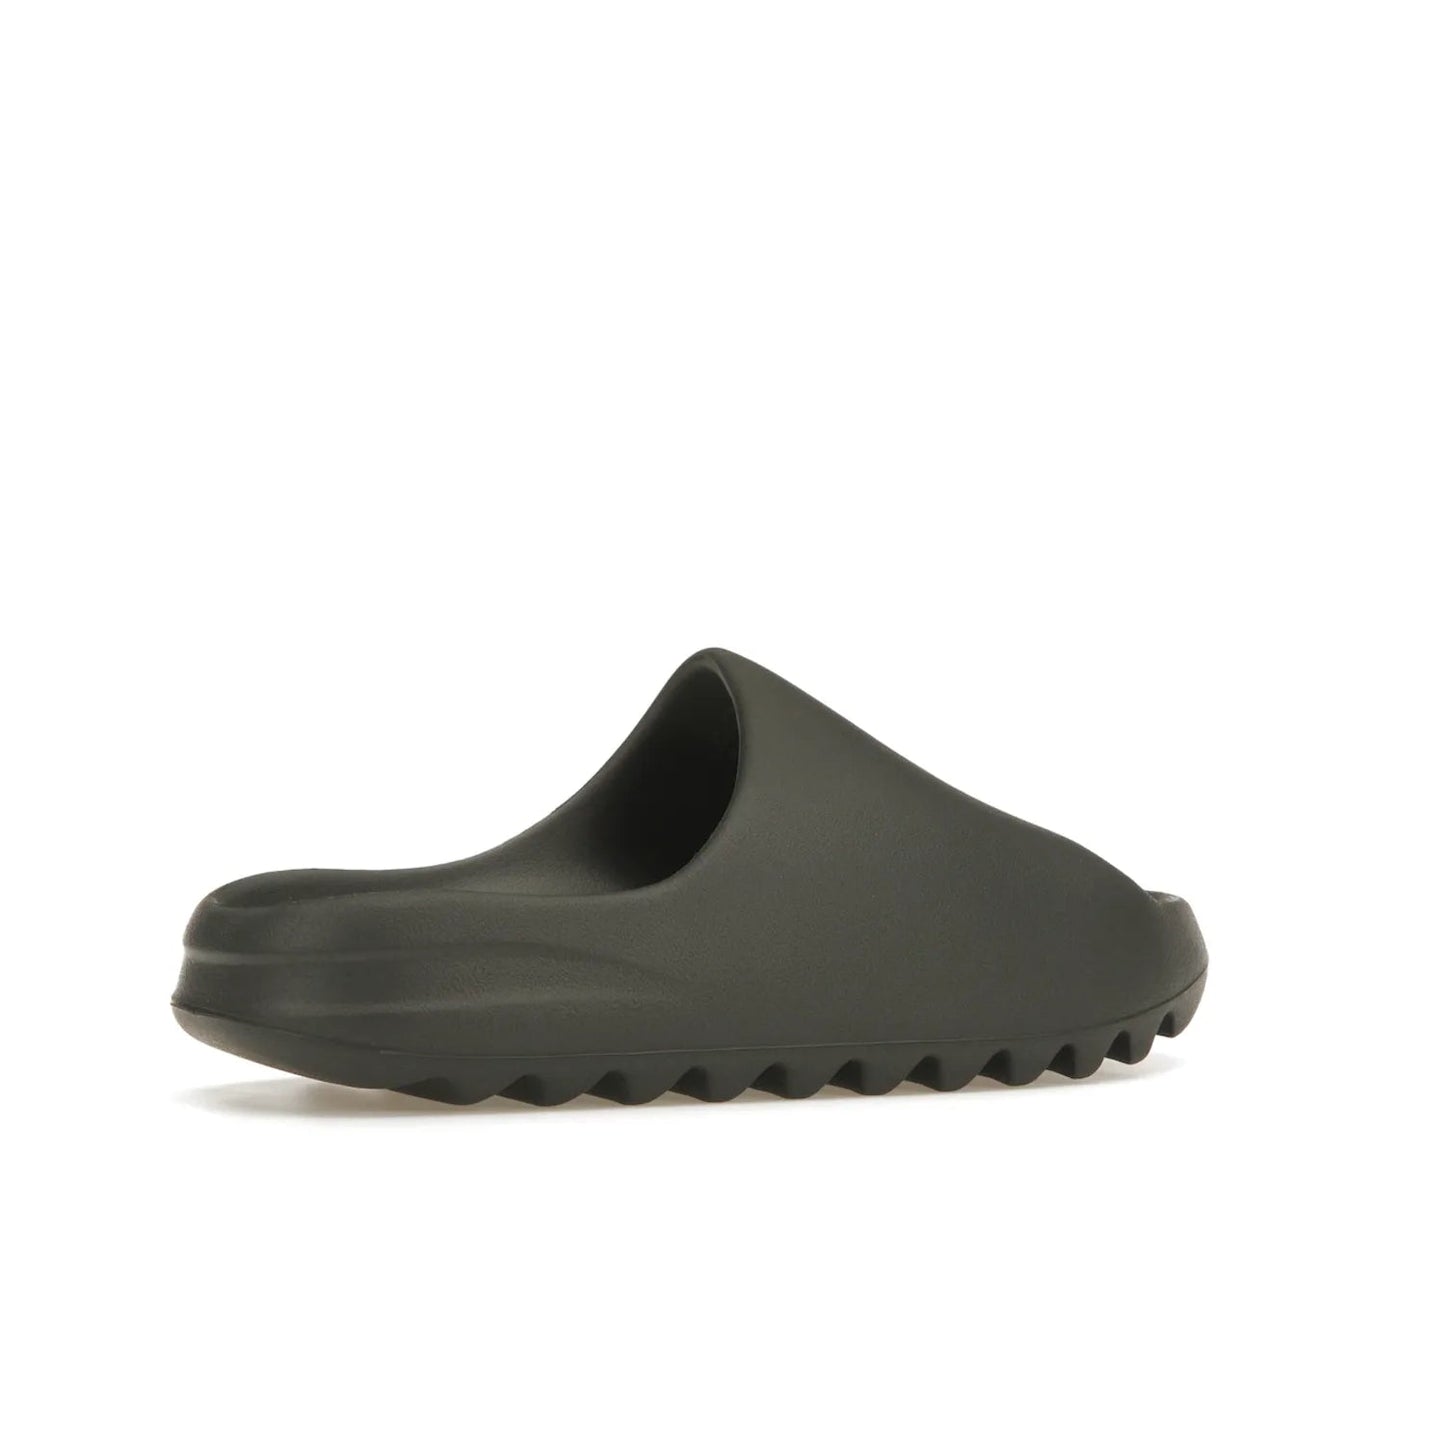 adidas Yeezy Slide Granite - Image 34 - Only at www.BallersClubKickz.com - Introducing the adidas Yeezy Slide Granite with a sleek, soft-to-touch one-piece upper – perfect for making a statement with its minimalistic design and luxurious comfort. Get yours now for only $70.